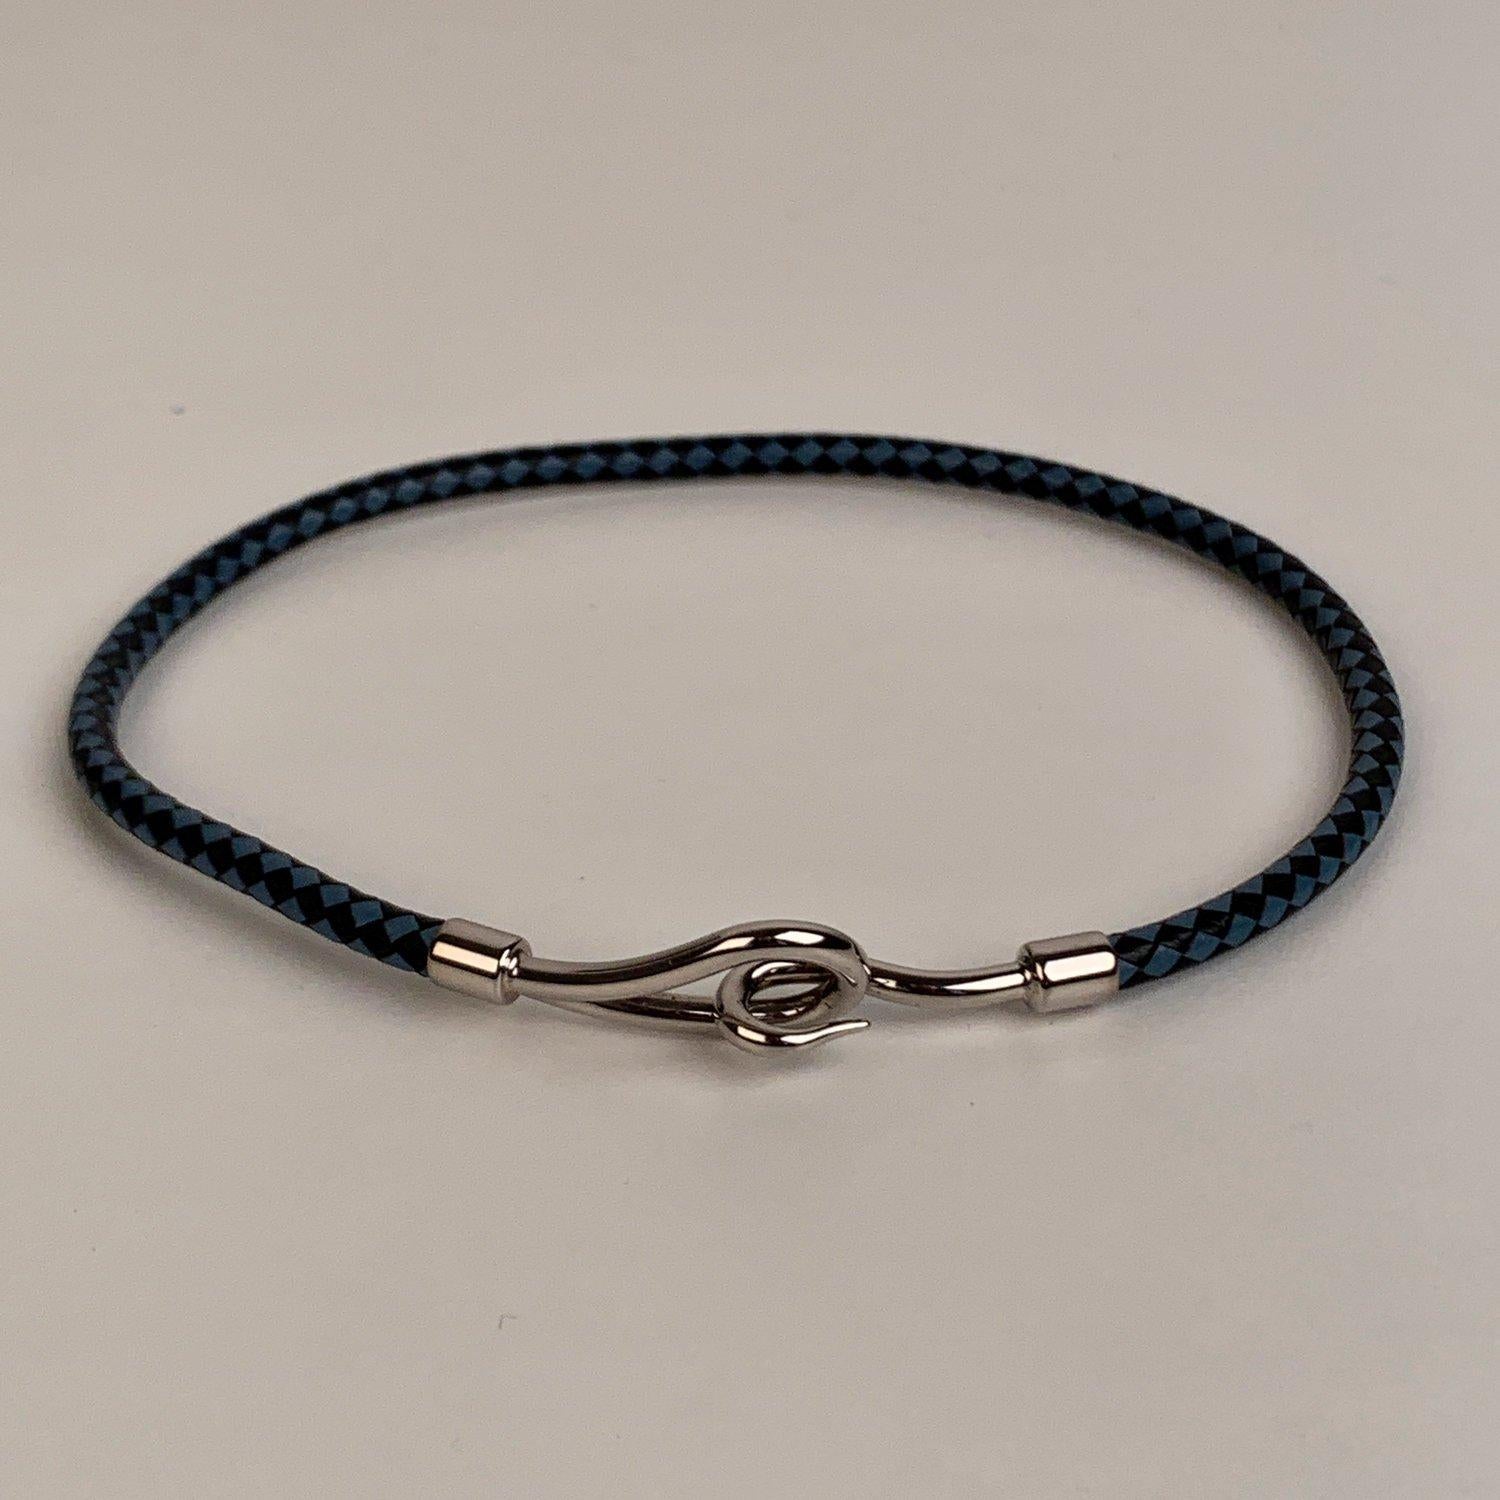 MATERIAL: Leather COLOR: Blue, Black MODEL: Bracelet GENDER: Women SIZE: 14.75 inches - 37.5 cm Condition A - EXCELLENT Used once or twice. Looks mint. Imperceptible signs of wear may be present due to storage - Internal Ref: - H15487-XX546 -